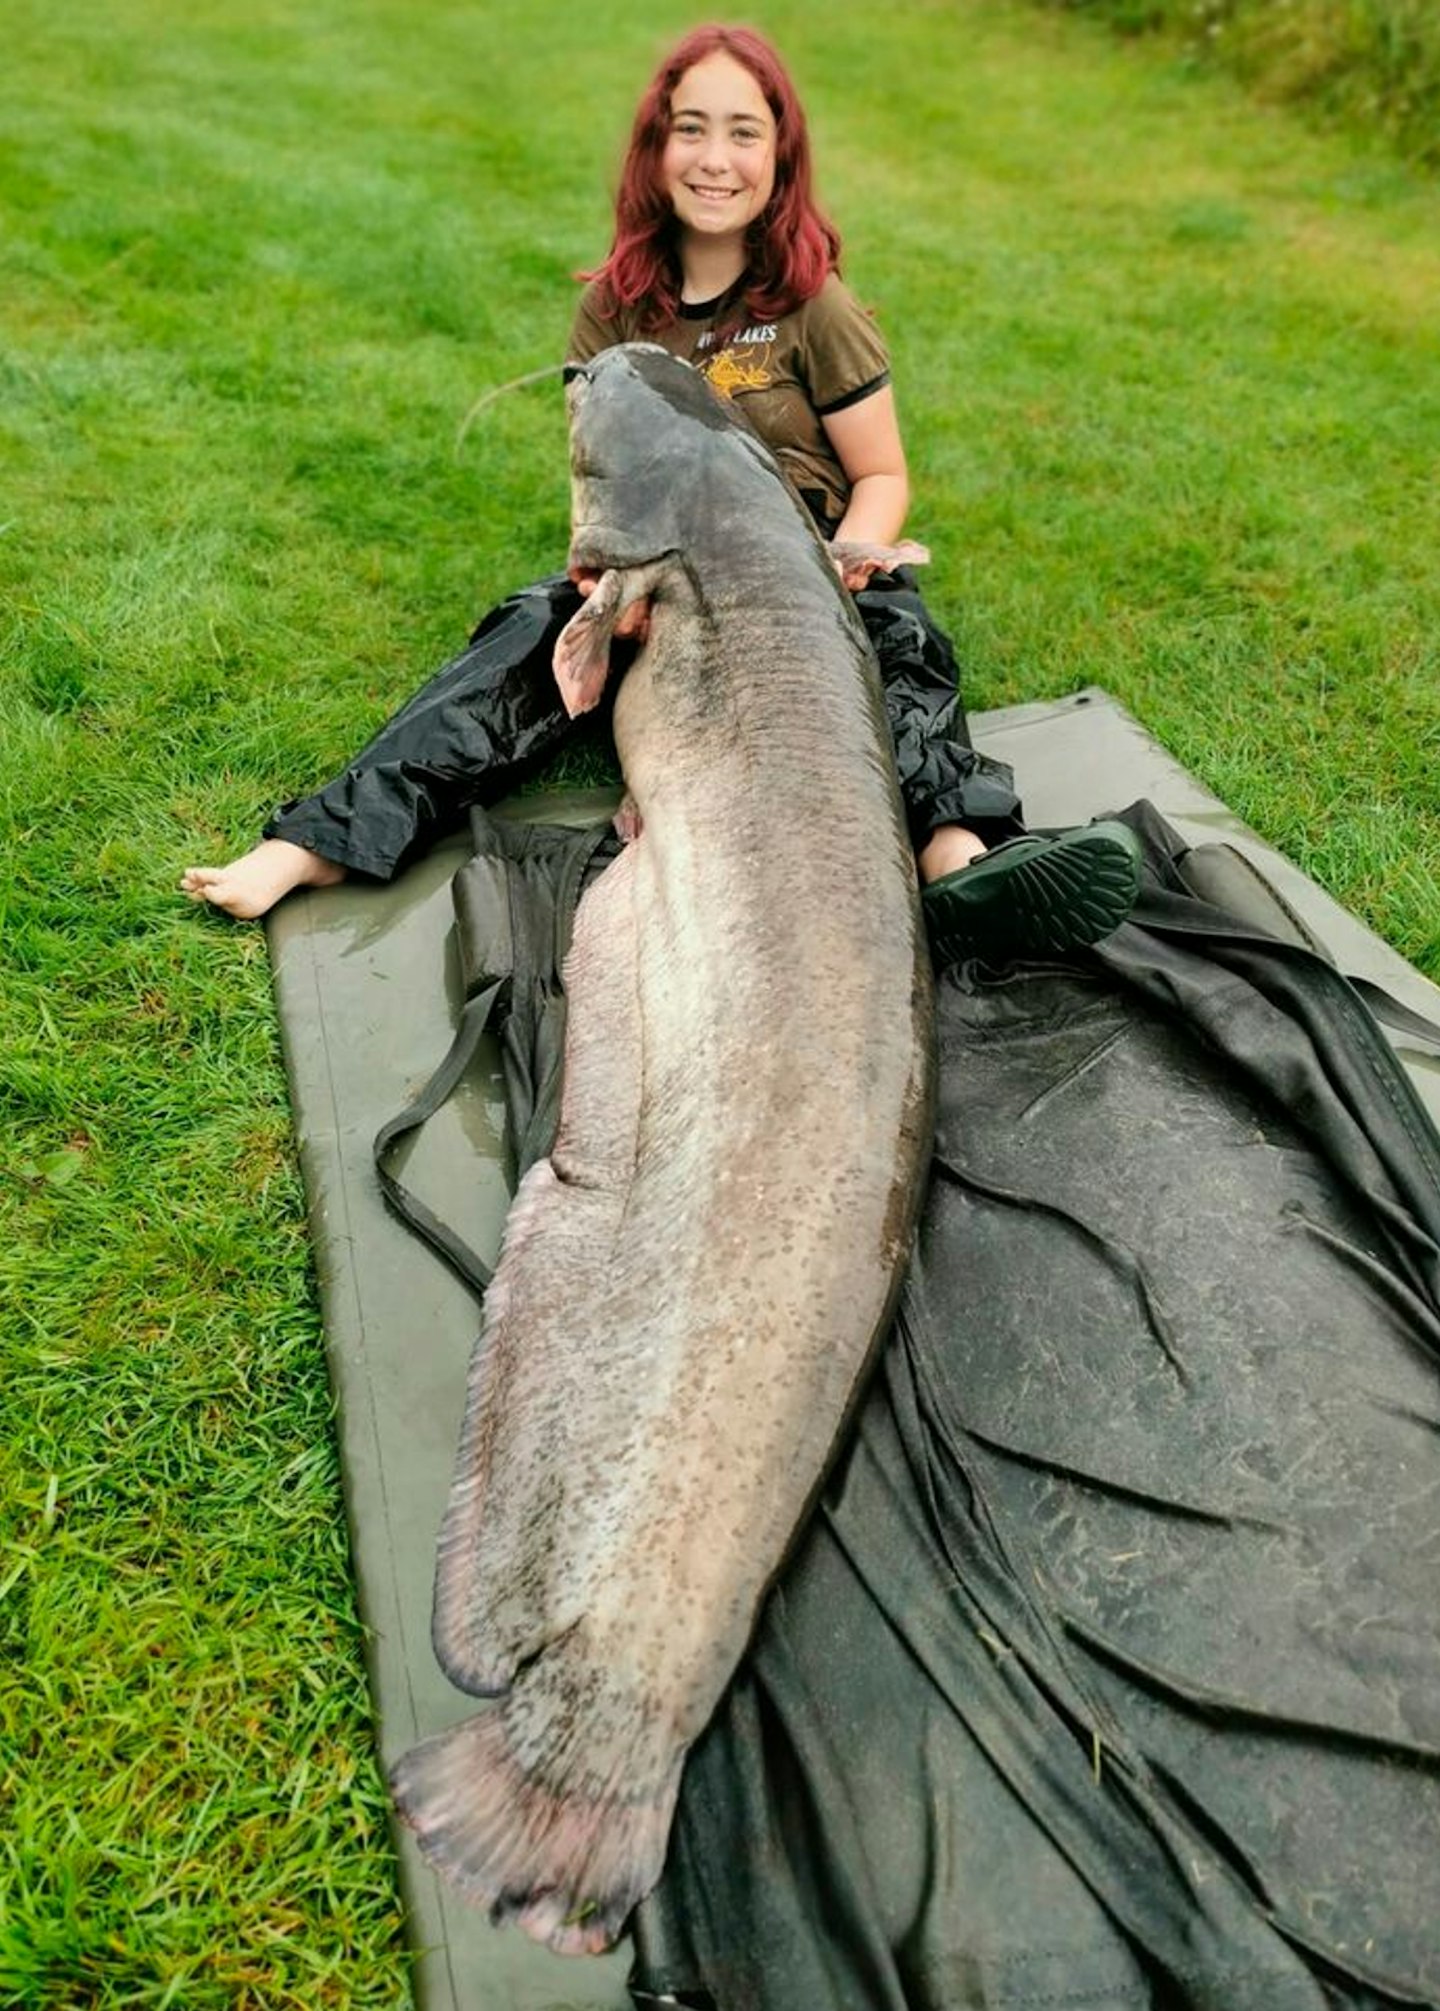 Hannah Truscott, aged 15, with her biggest cat to date at 96lb 4oz